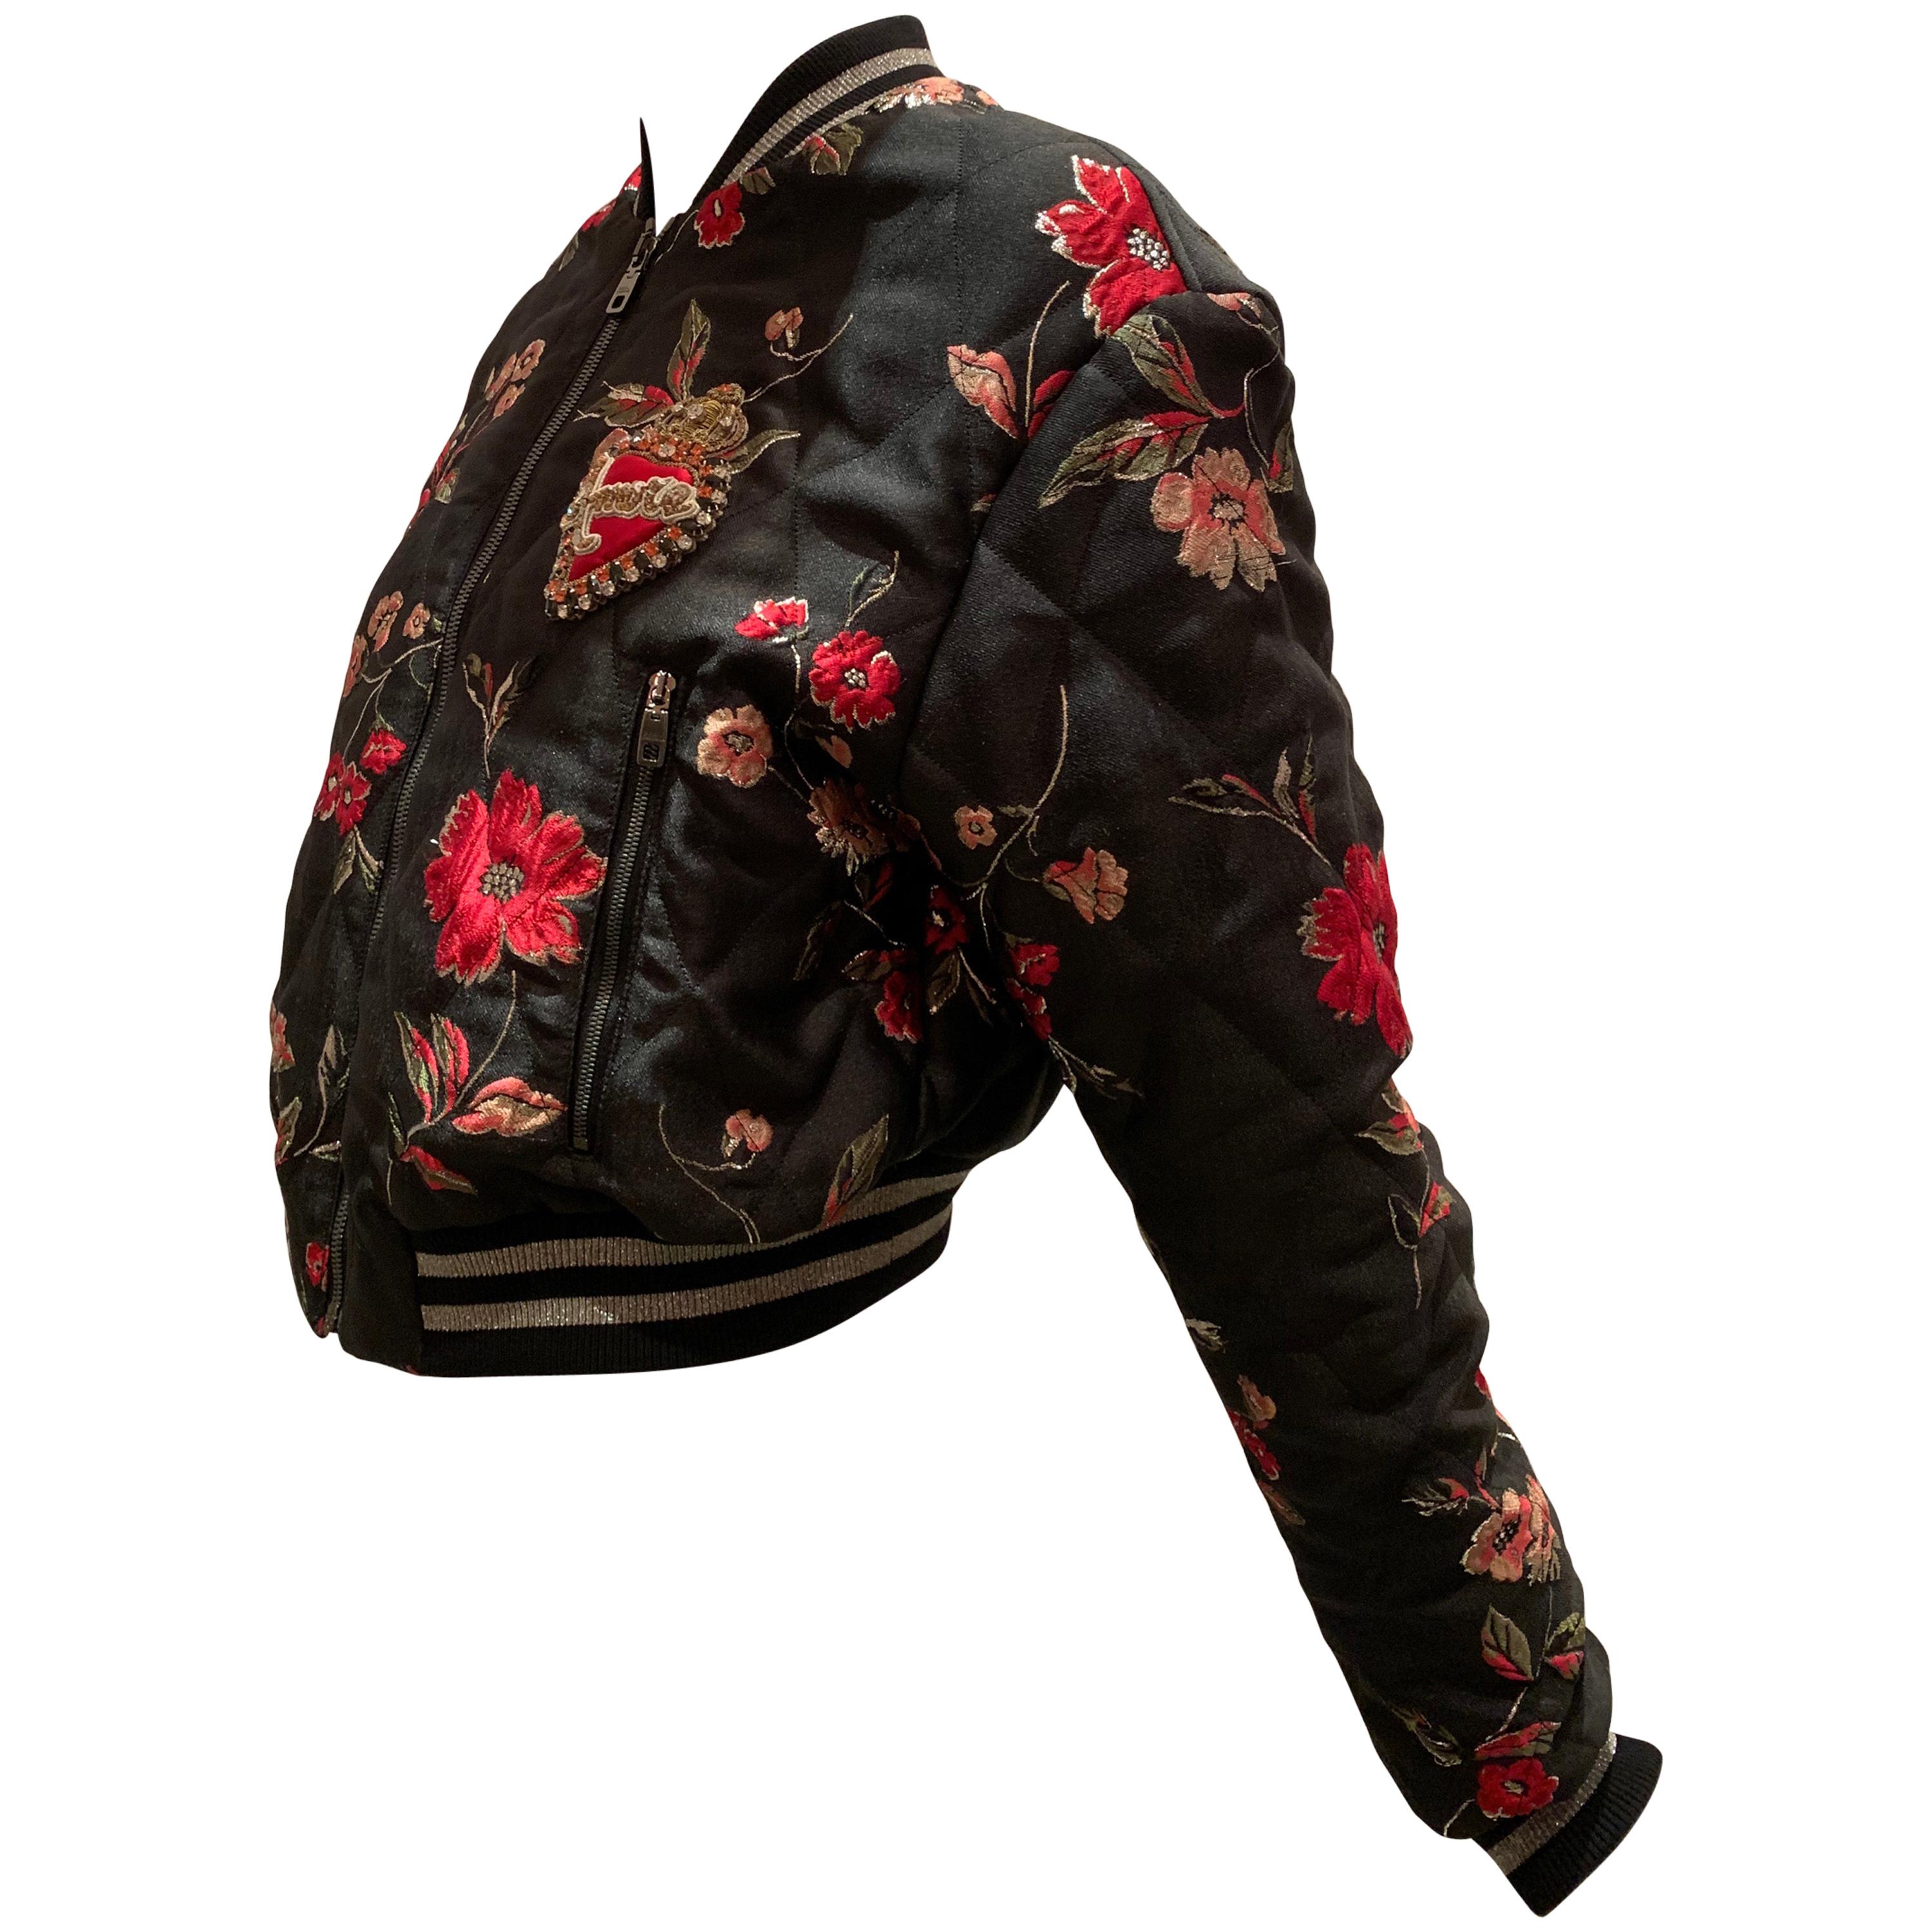 Dolce & Gabbana "Amore" Floral Brocade Bomber Jacket W/ Fab Floral Lining